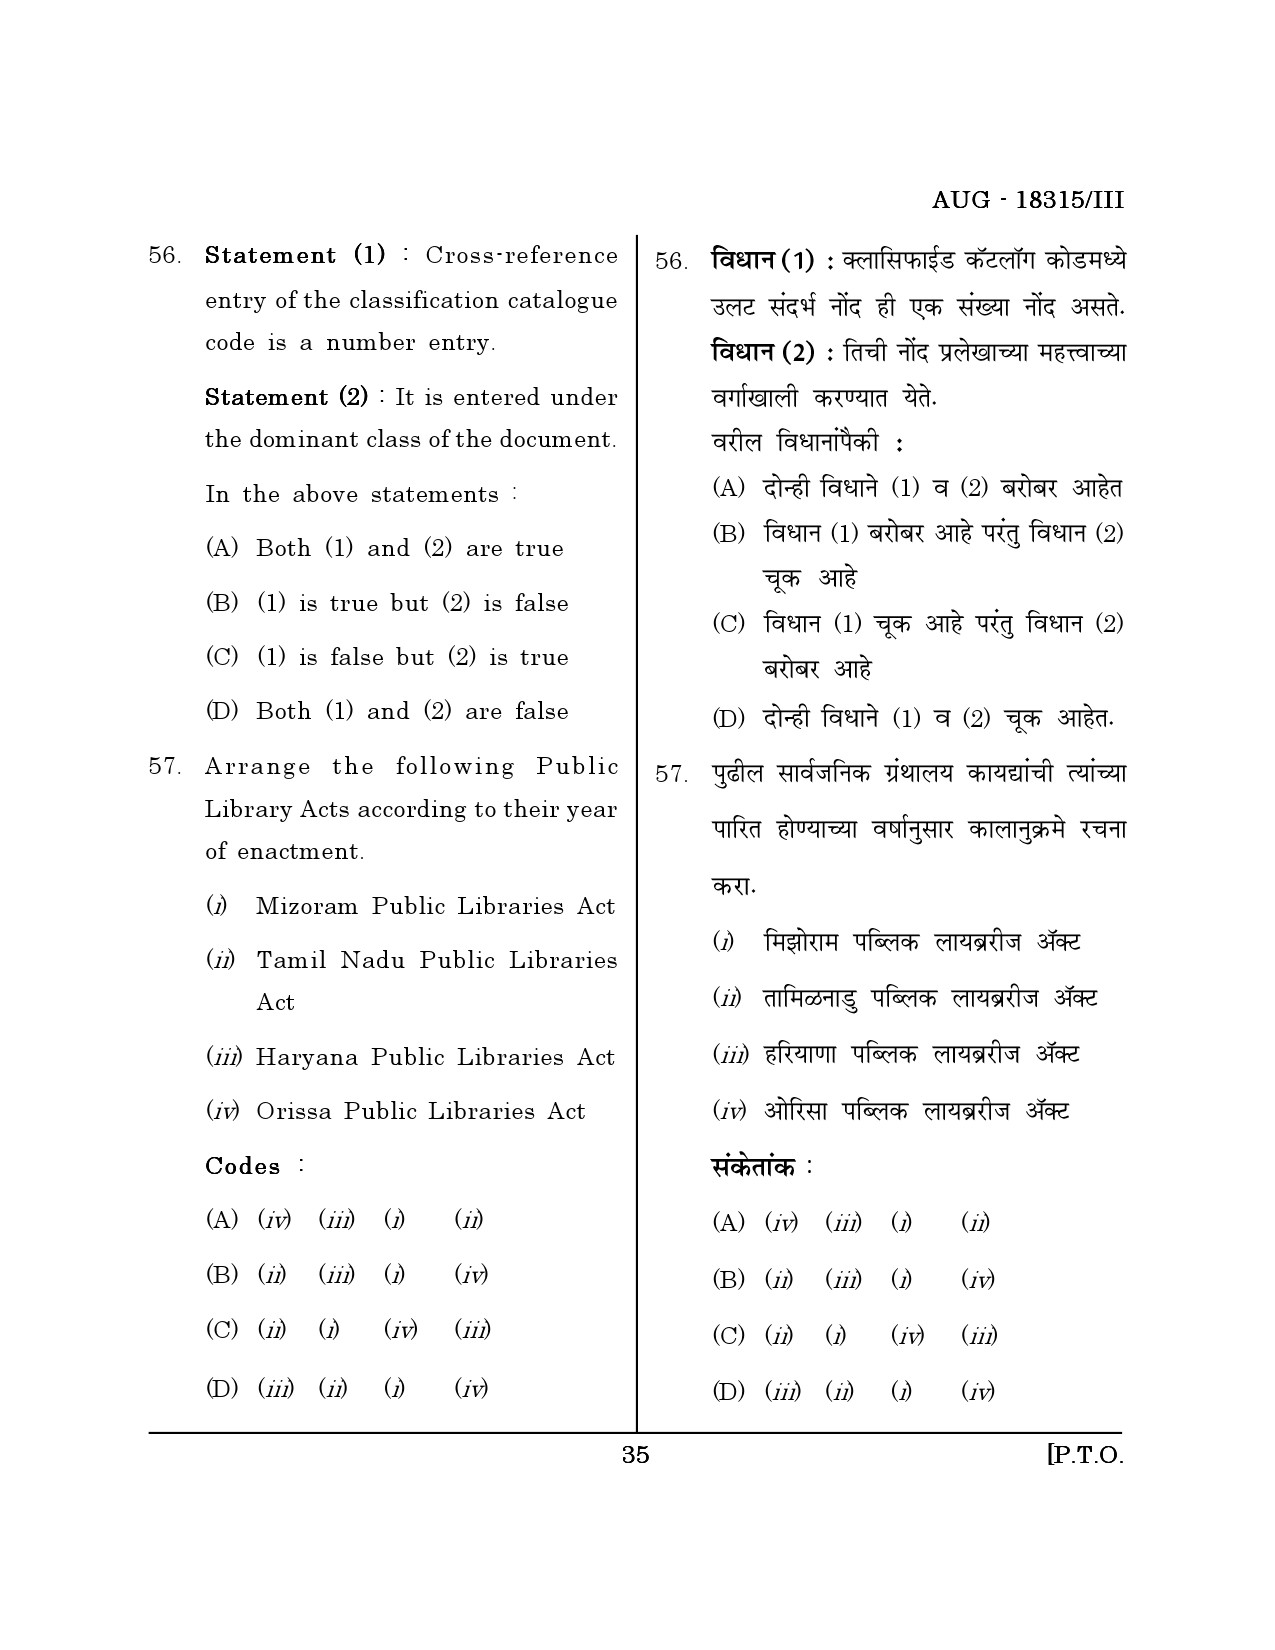 Maharashtra SET Library Information Science Question Paper III August 2015 34